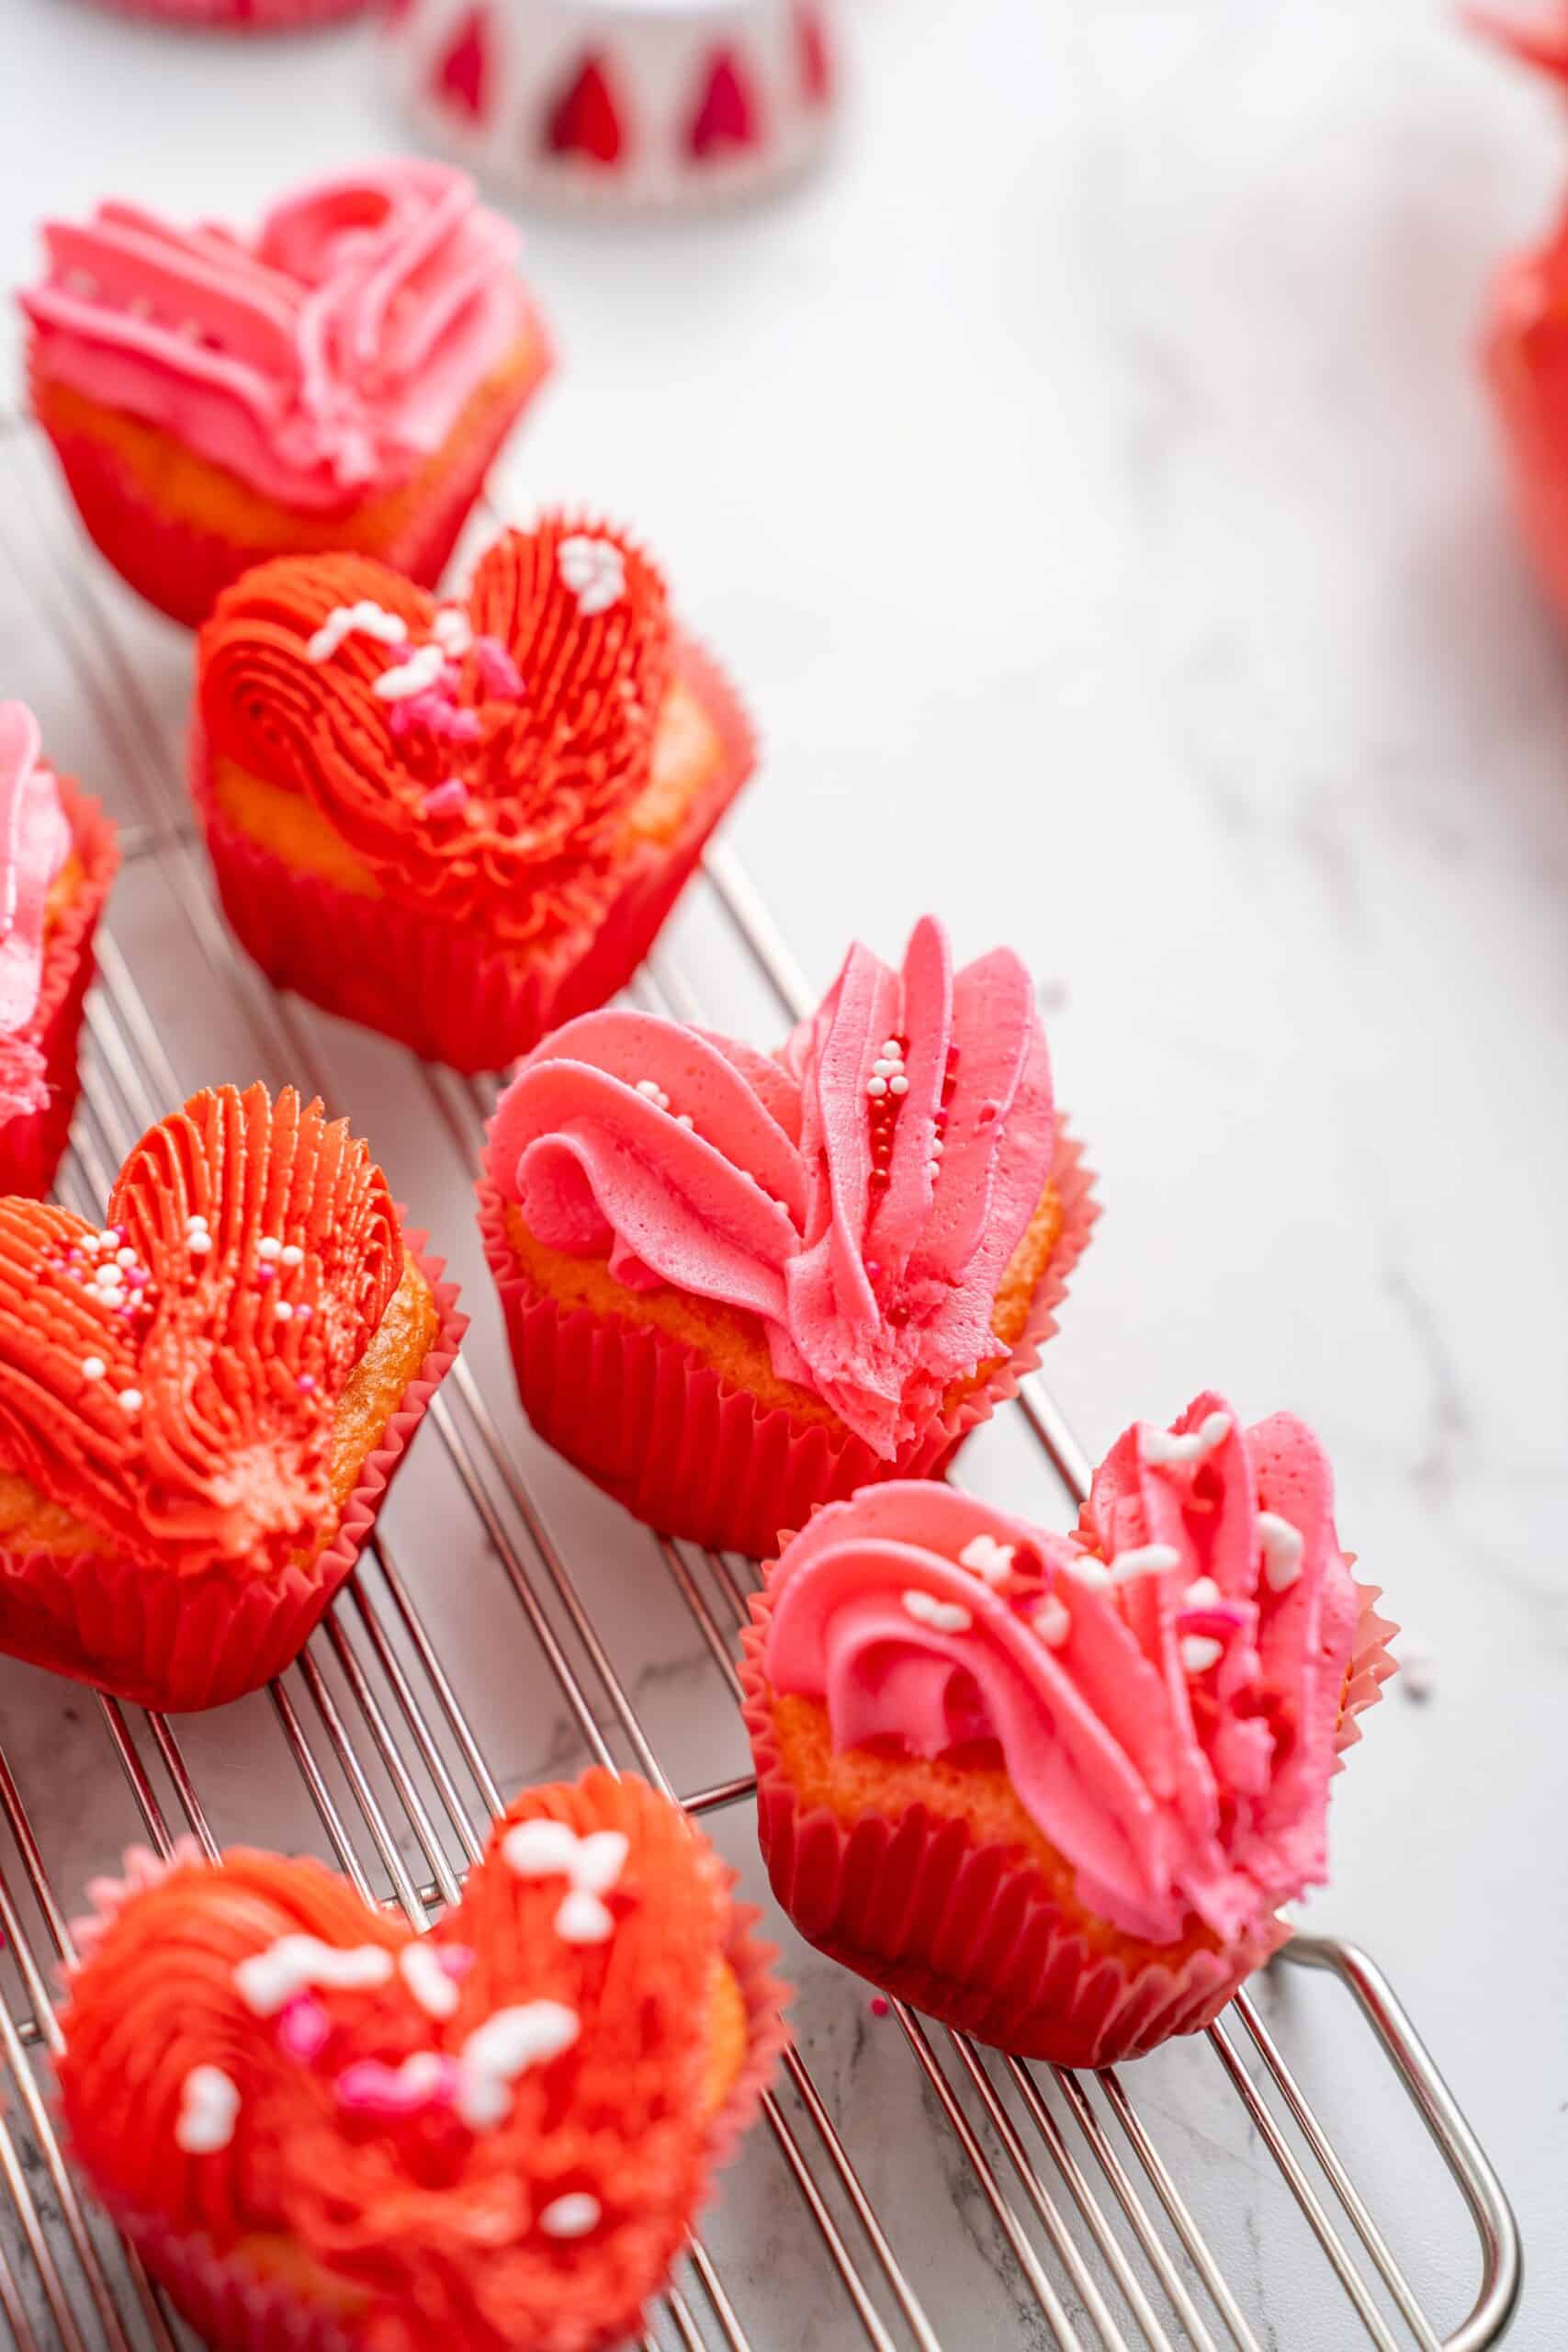 heart shaped cupcakes (Valentine's Day cupcake decorations)